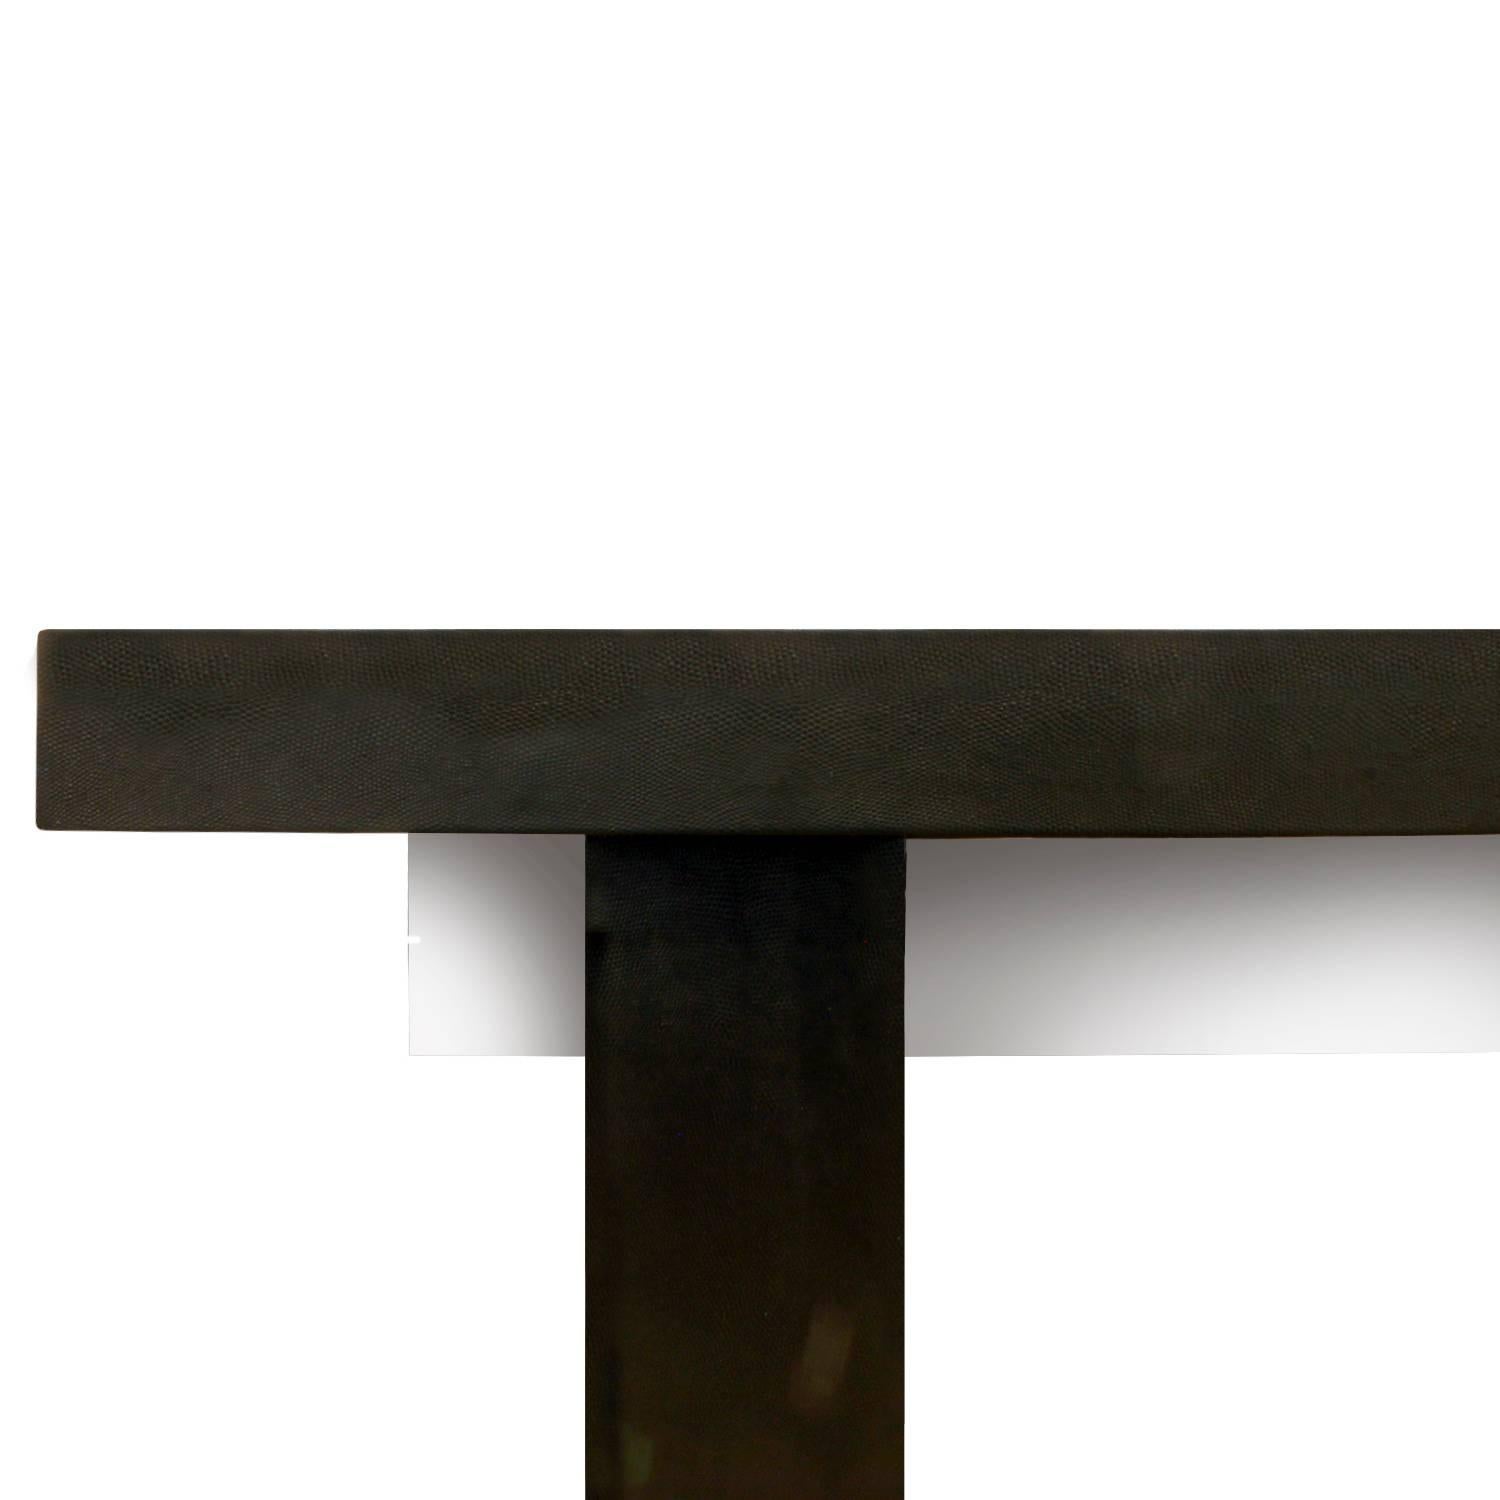 Late 20th Century Karl Springer Console Table in Embossed Lizard Leather and Gun Metal, 1986